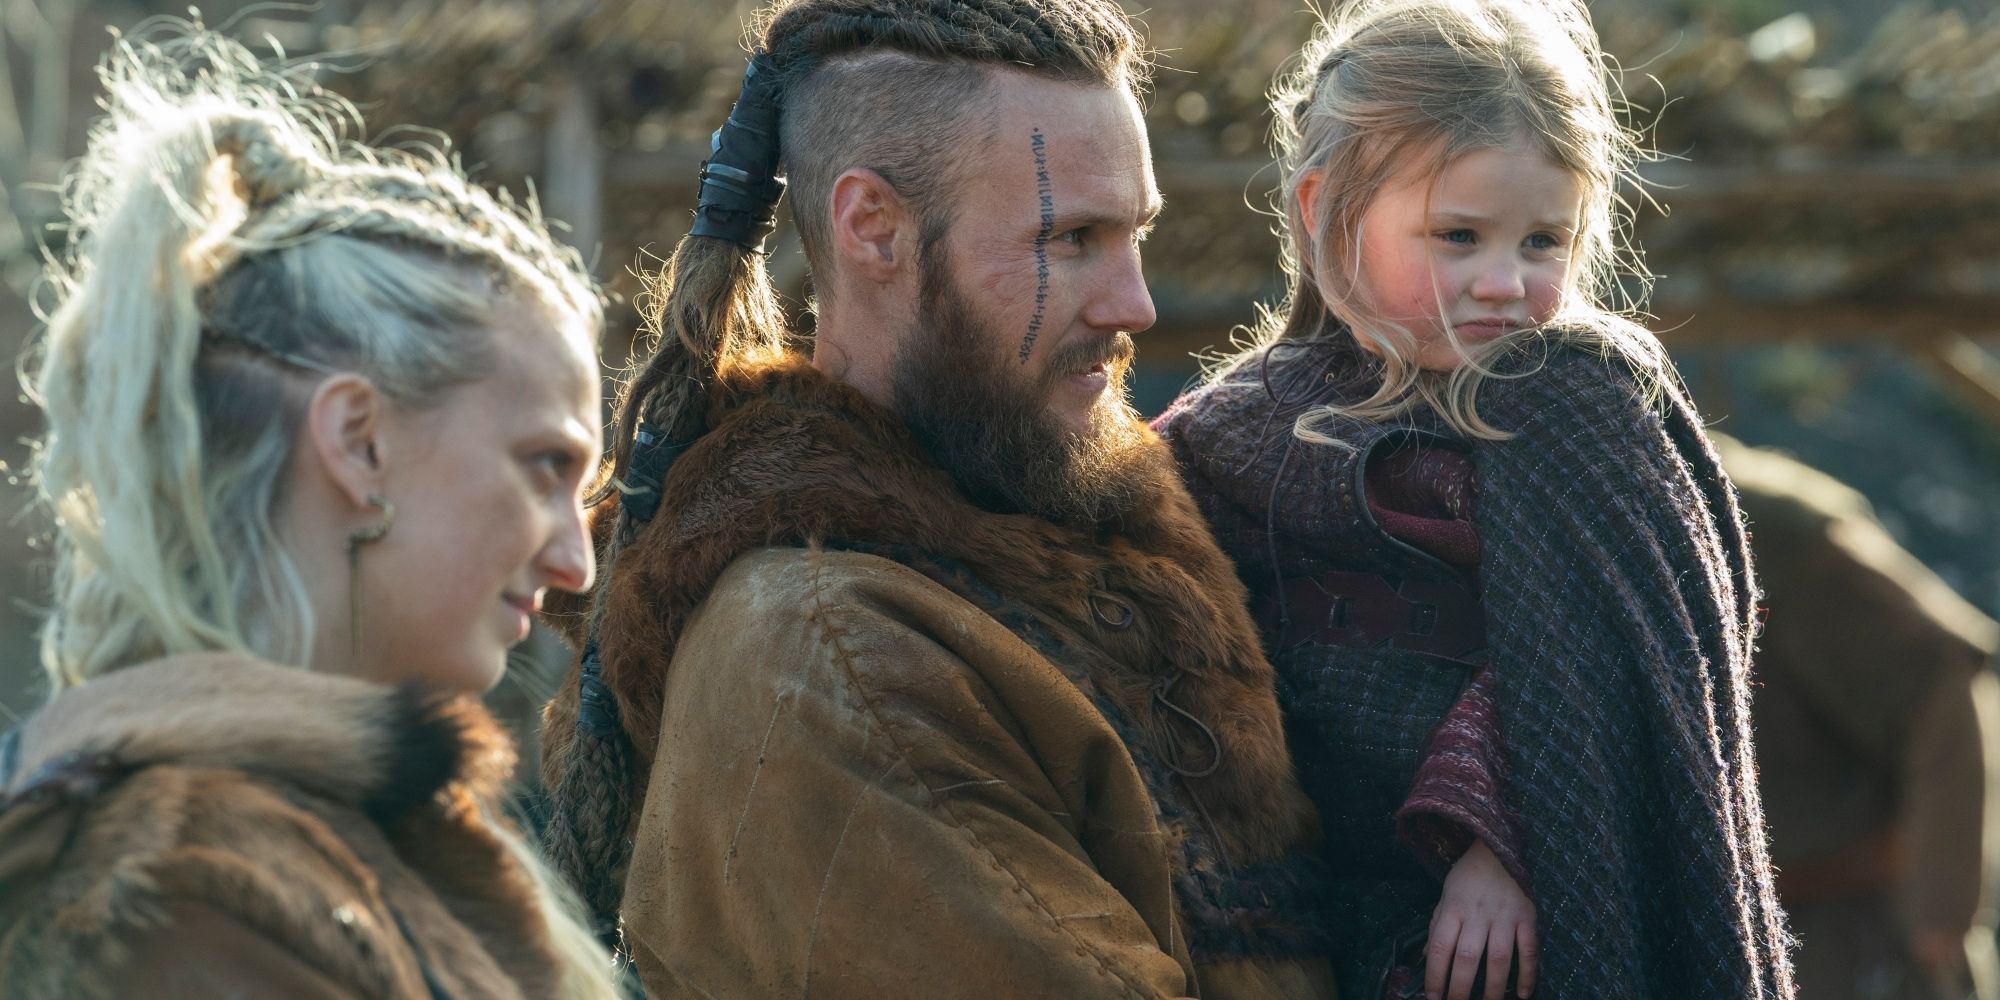 Torvi and Ubbe with little Asa in Vikings